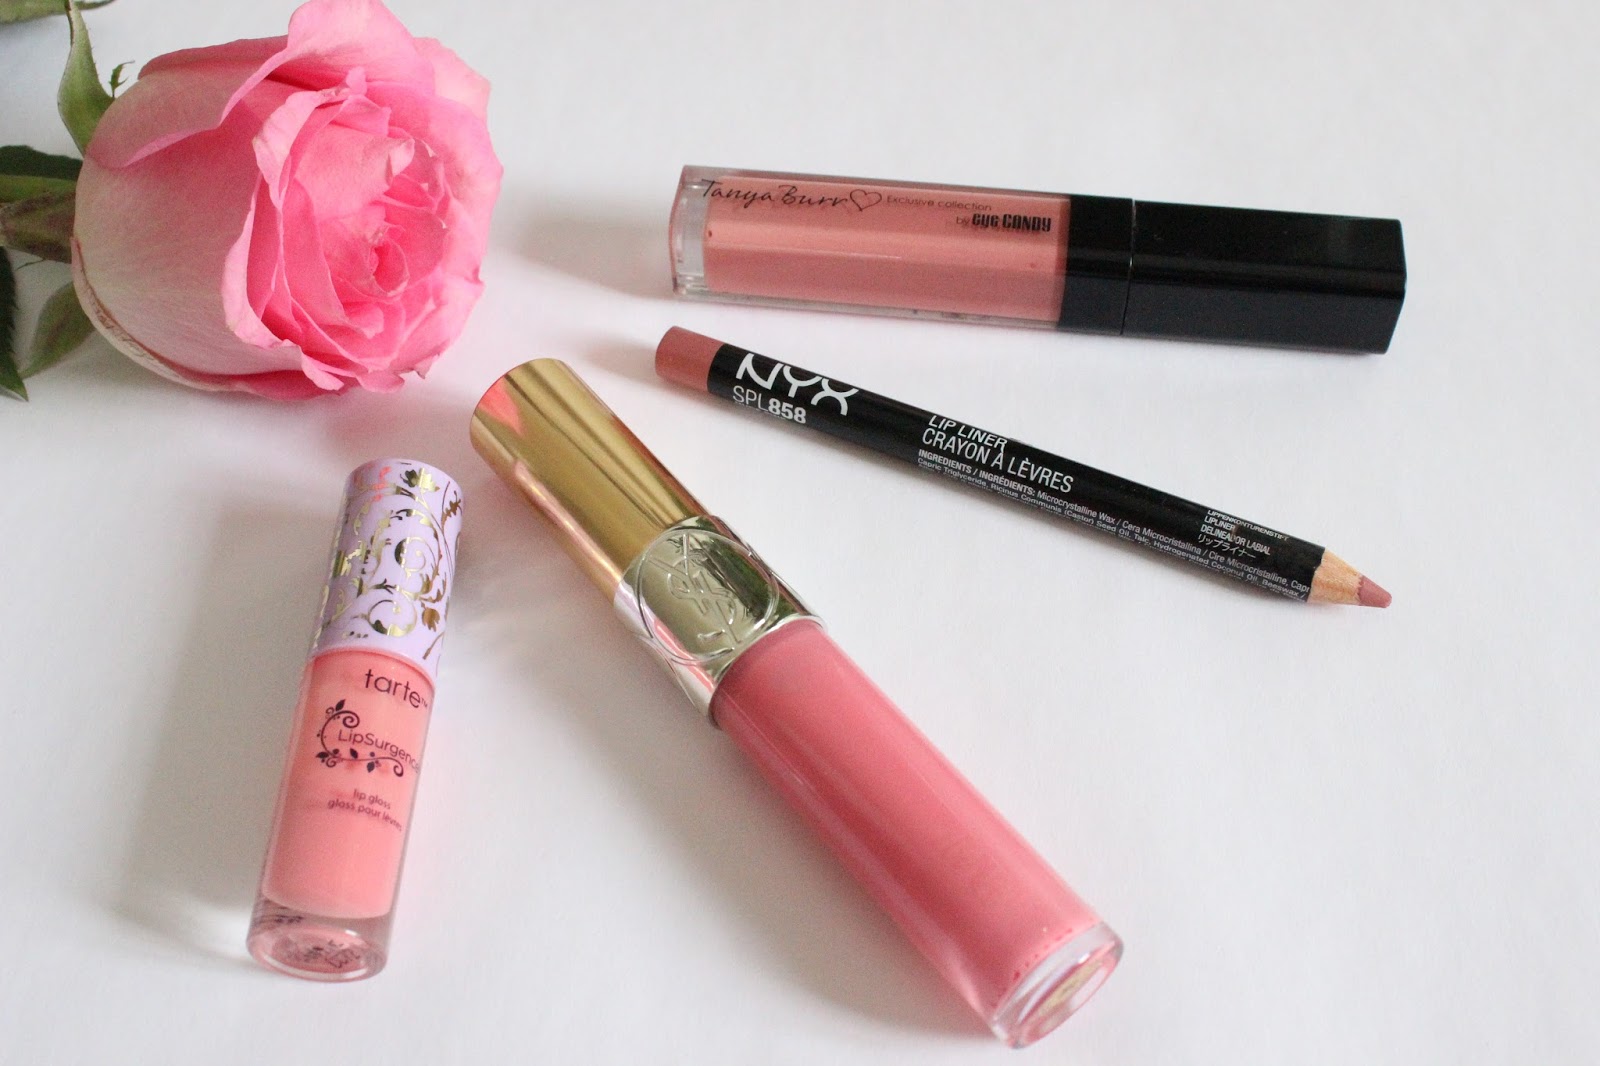 Pretty Pink Lips | NYX Slim Lip Pencil in Natural Pink, Tarte LipSurgence in Magic, YSL Gloss Veloupte in 202, Tanya Burr Lip Gloss in Afternoon Tea